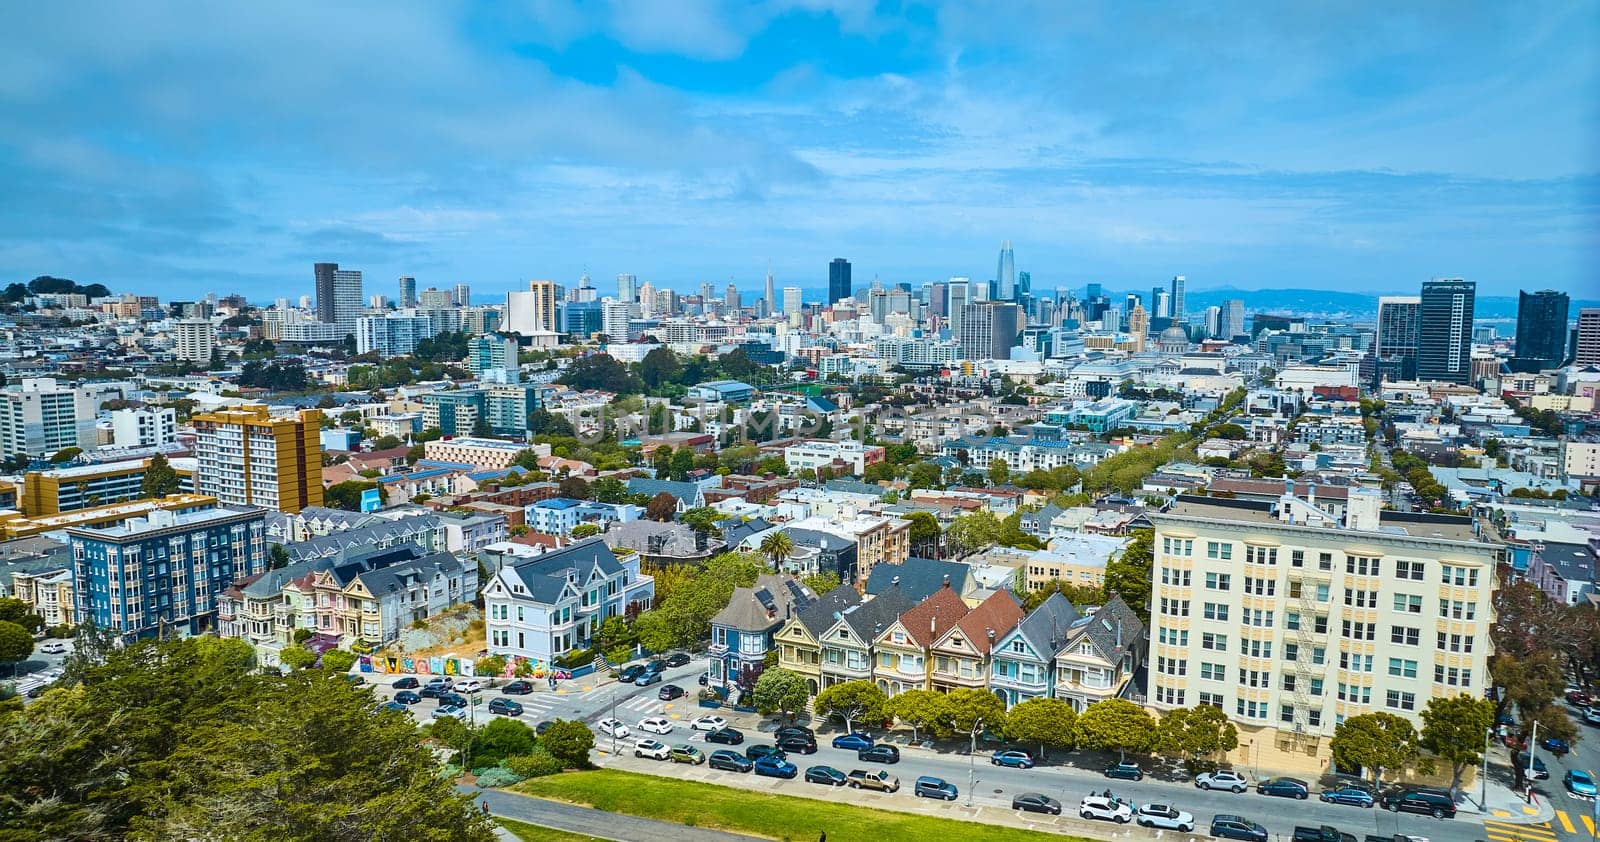 Image of Aerial San Francisco The Painted Ladies with wide view of city and skyscrapers under pretty sky